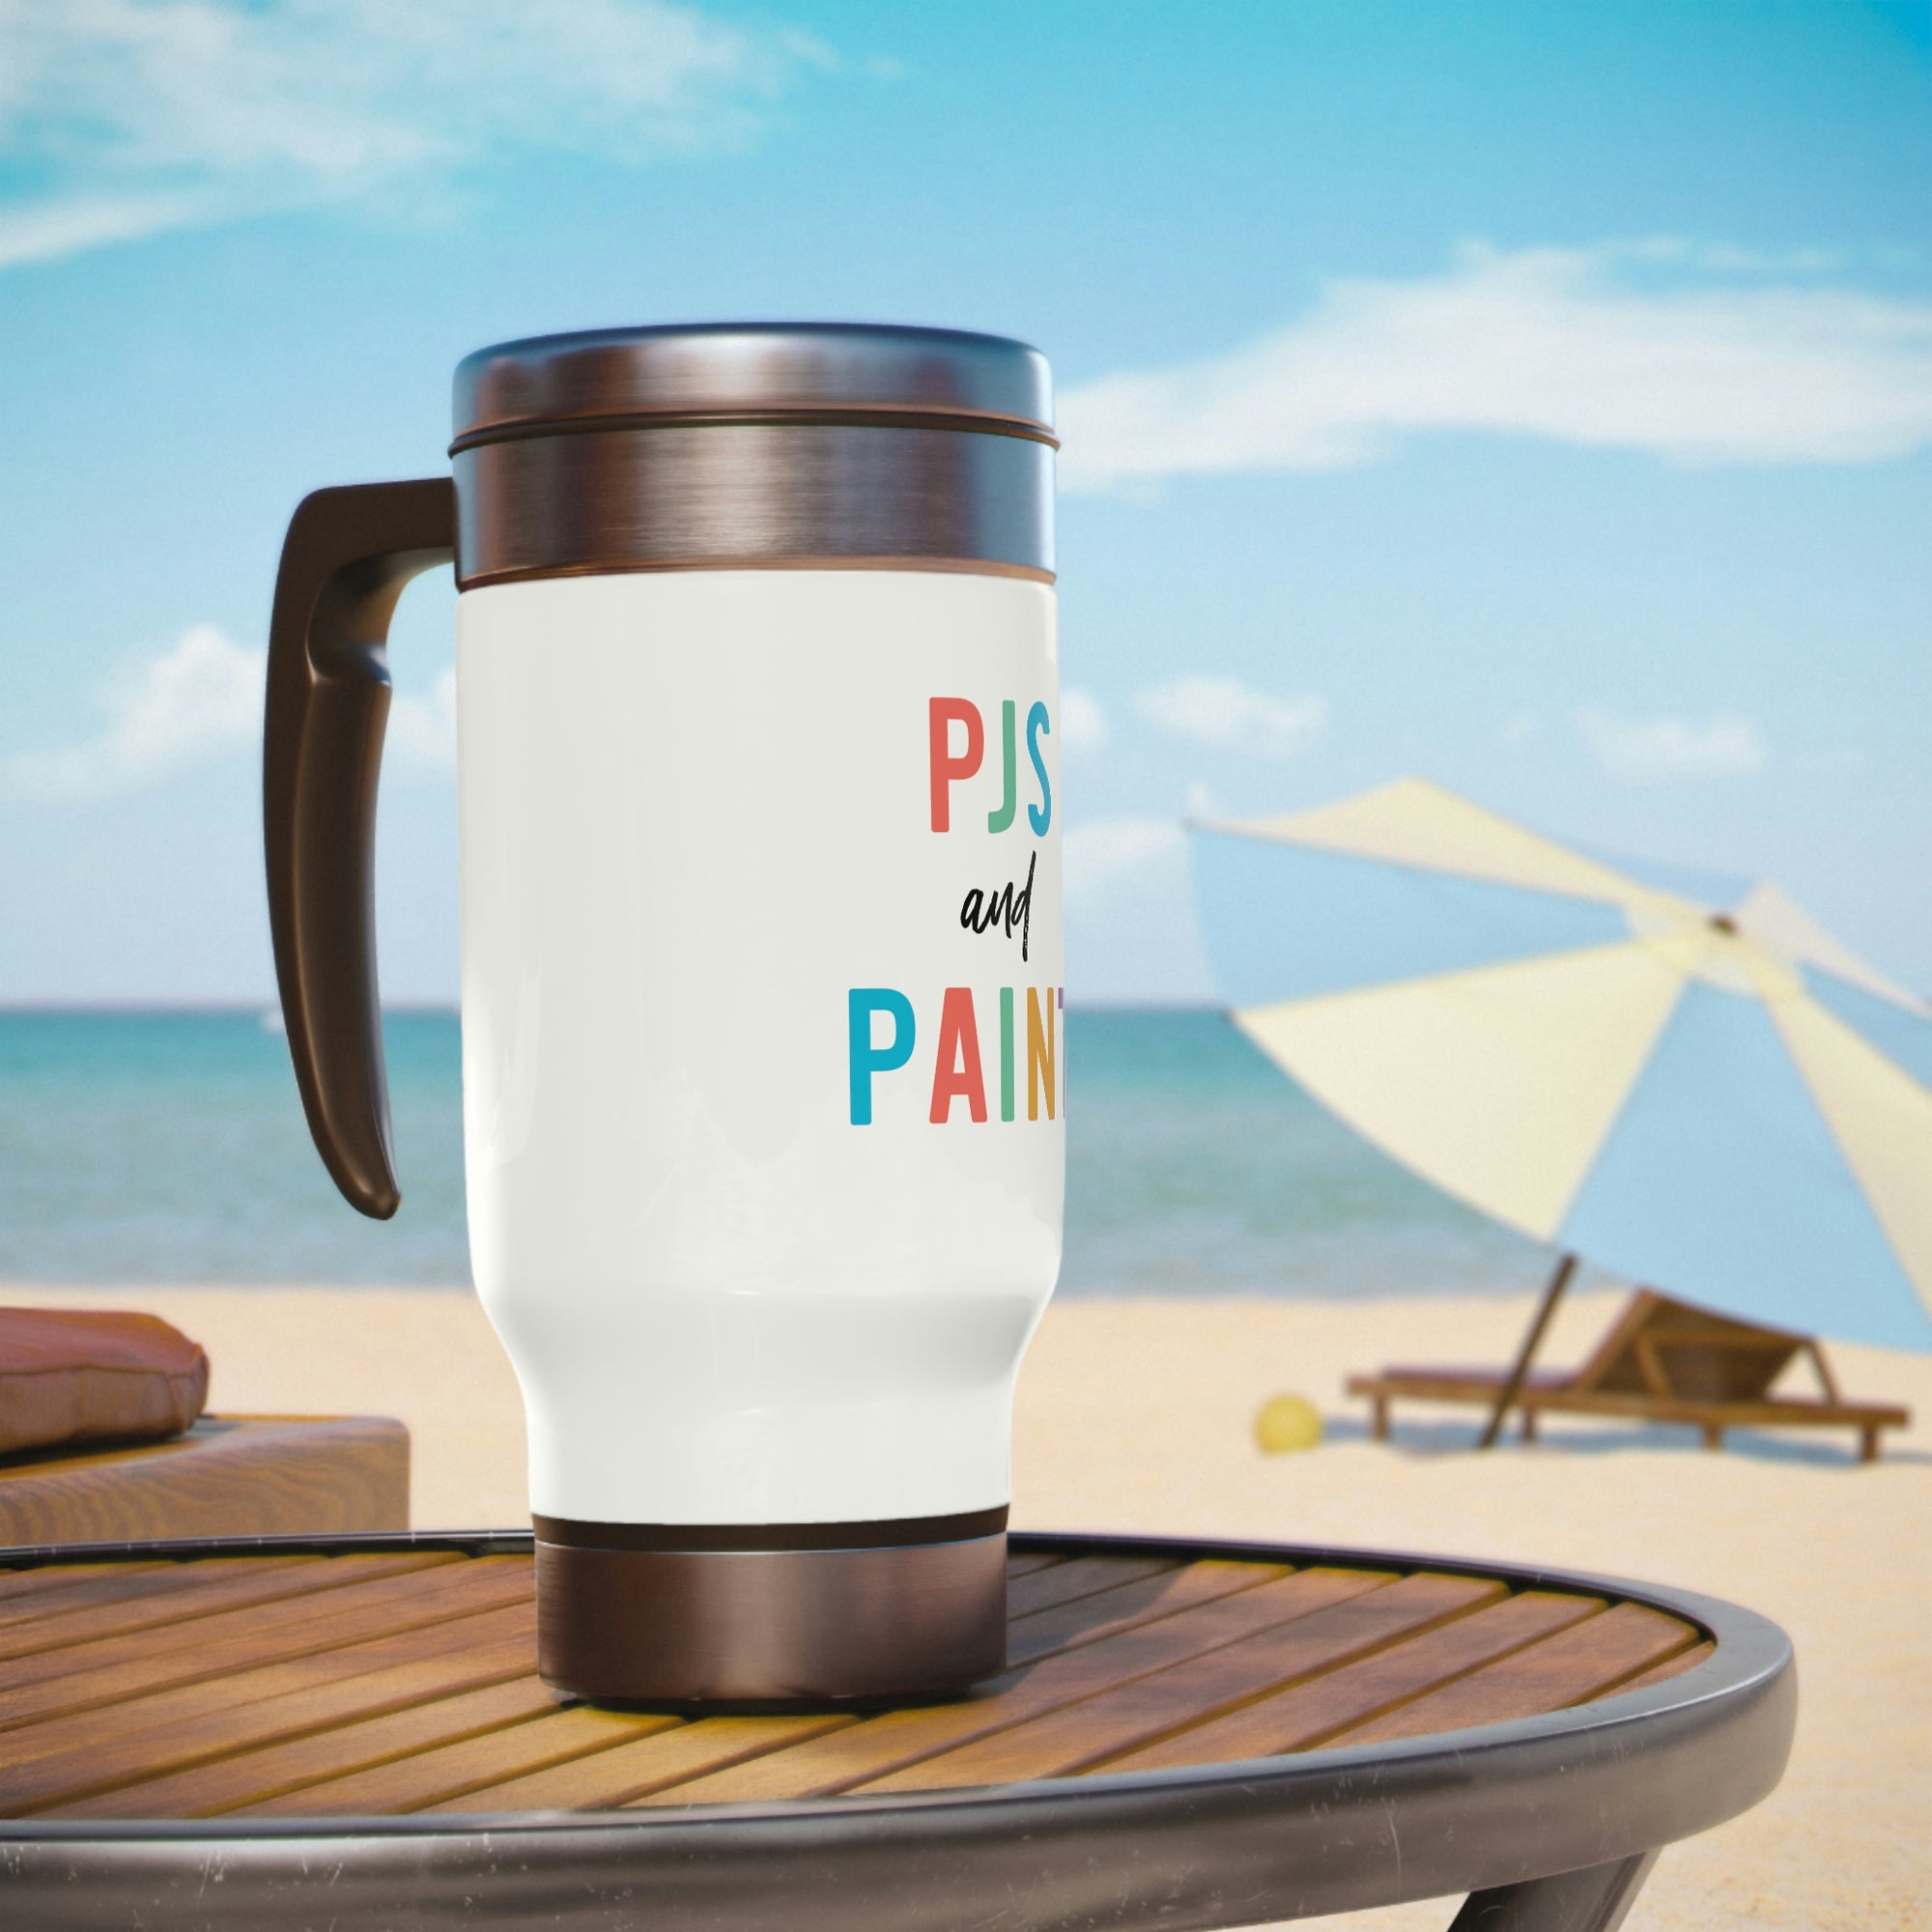 Pjs and Paint® Travel Mug with Handle